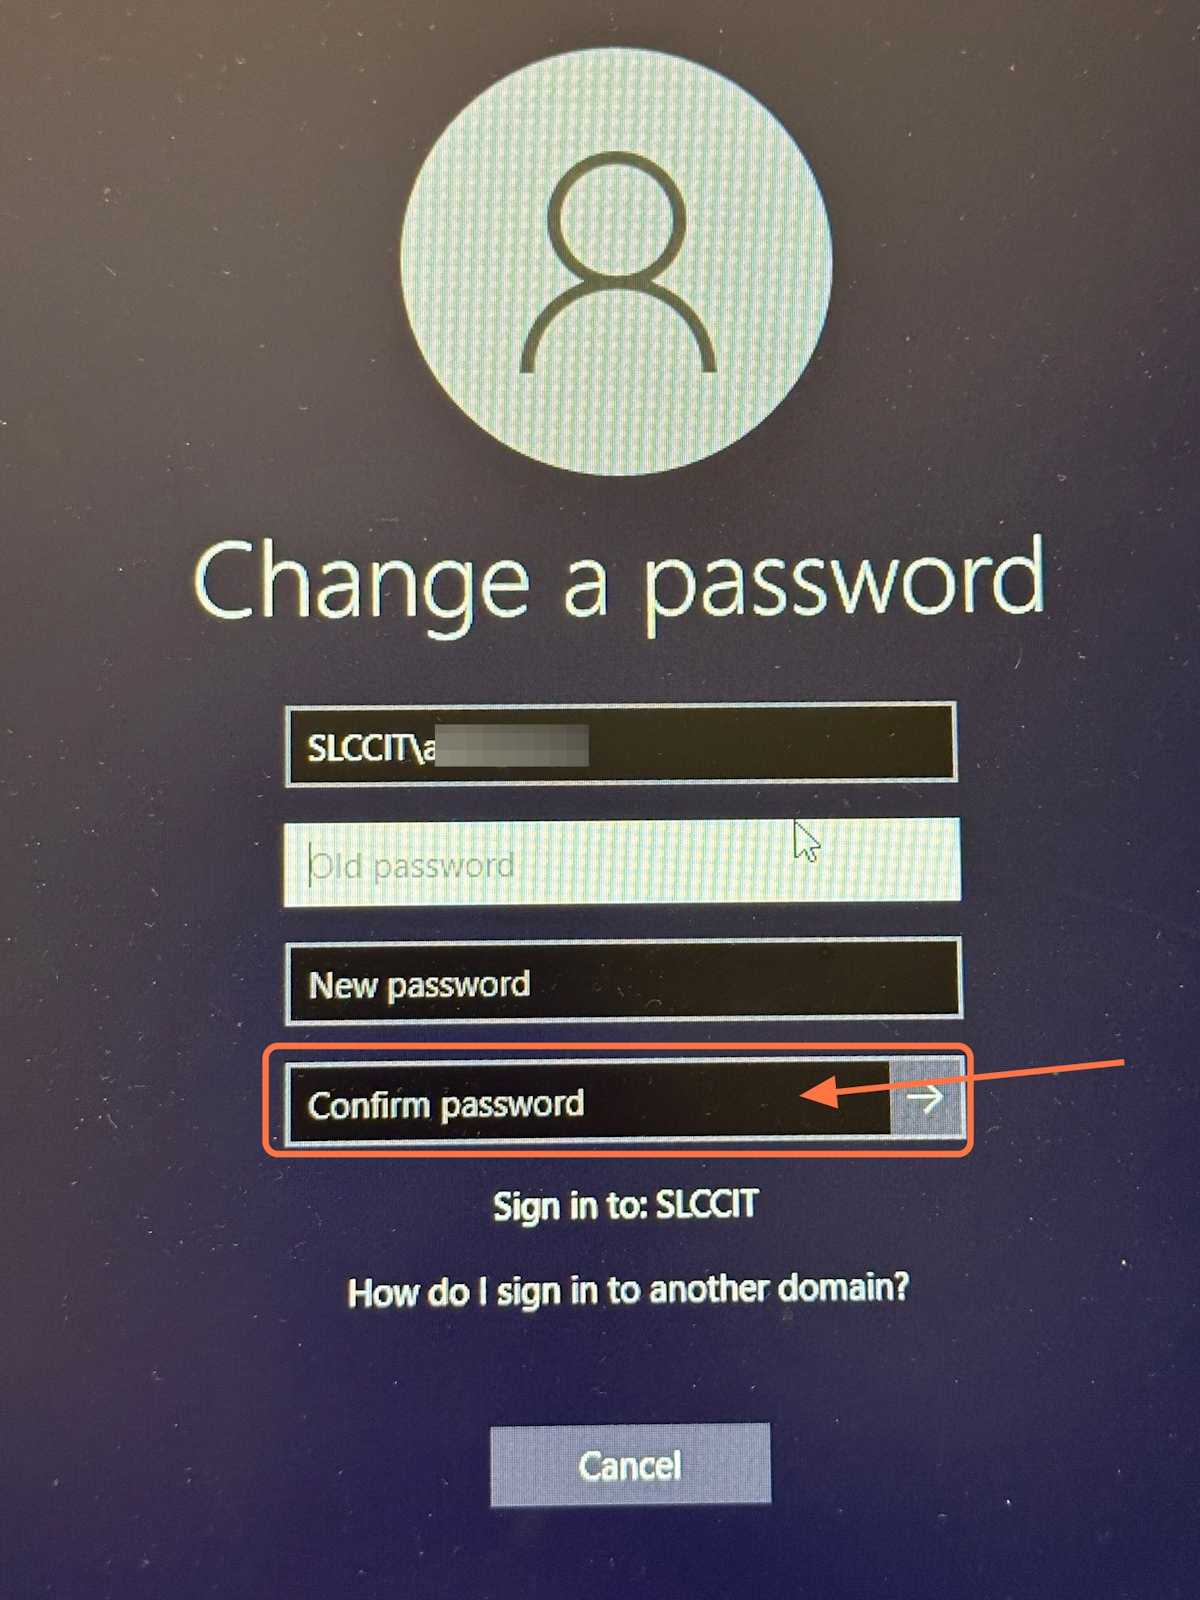 Put your new password where it says Confirm password